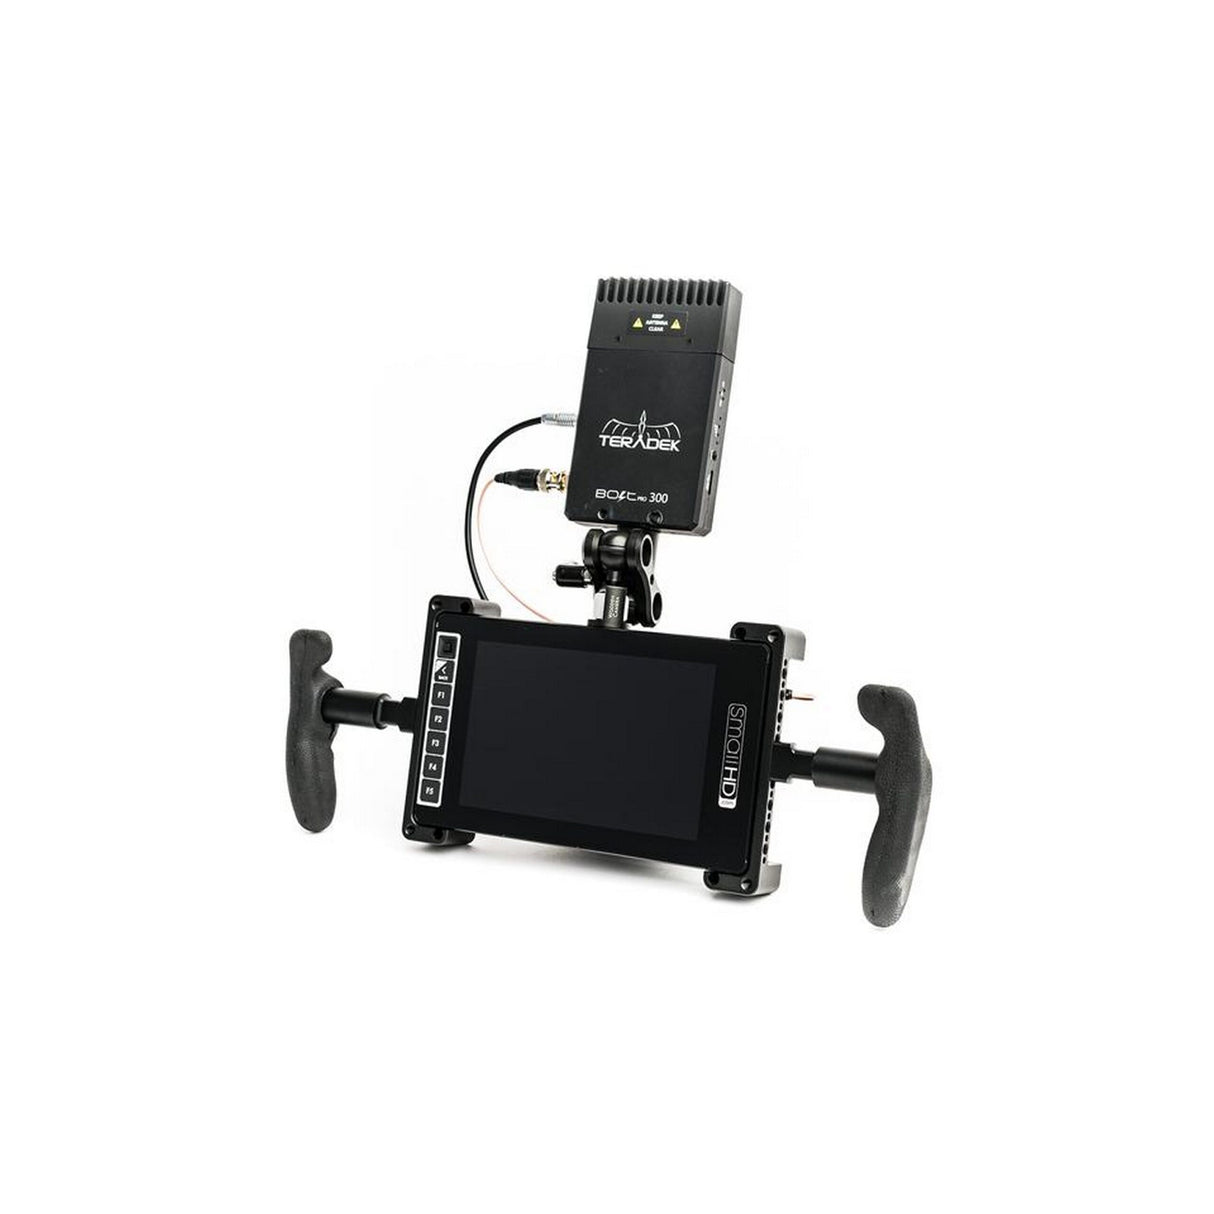 SmallHD ACC-HANDLES Monitor Handles and Neck Strap